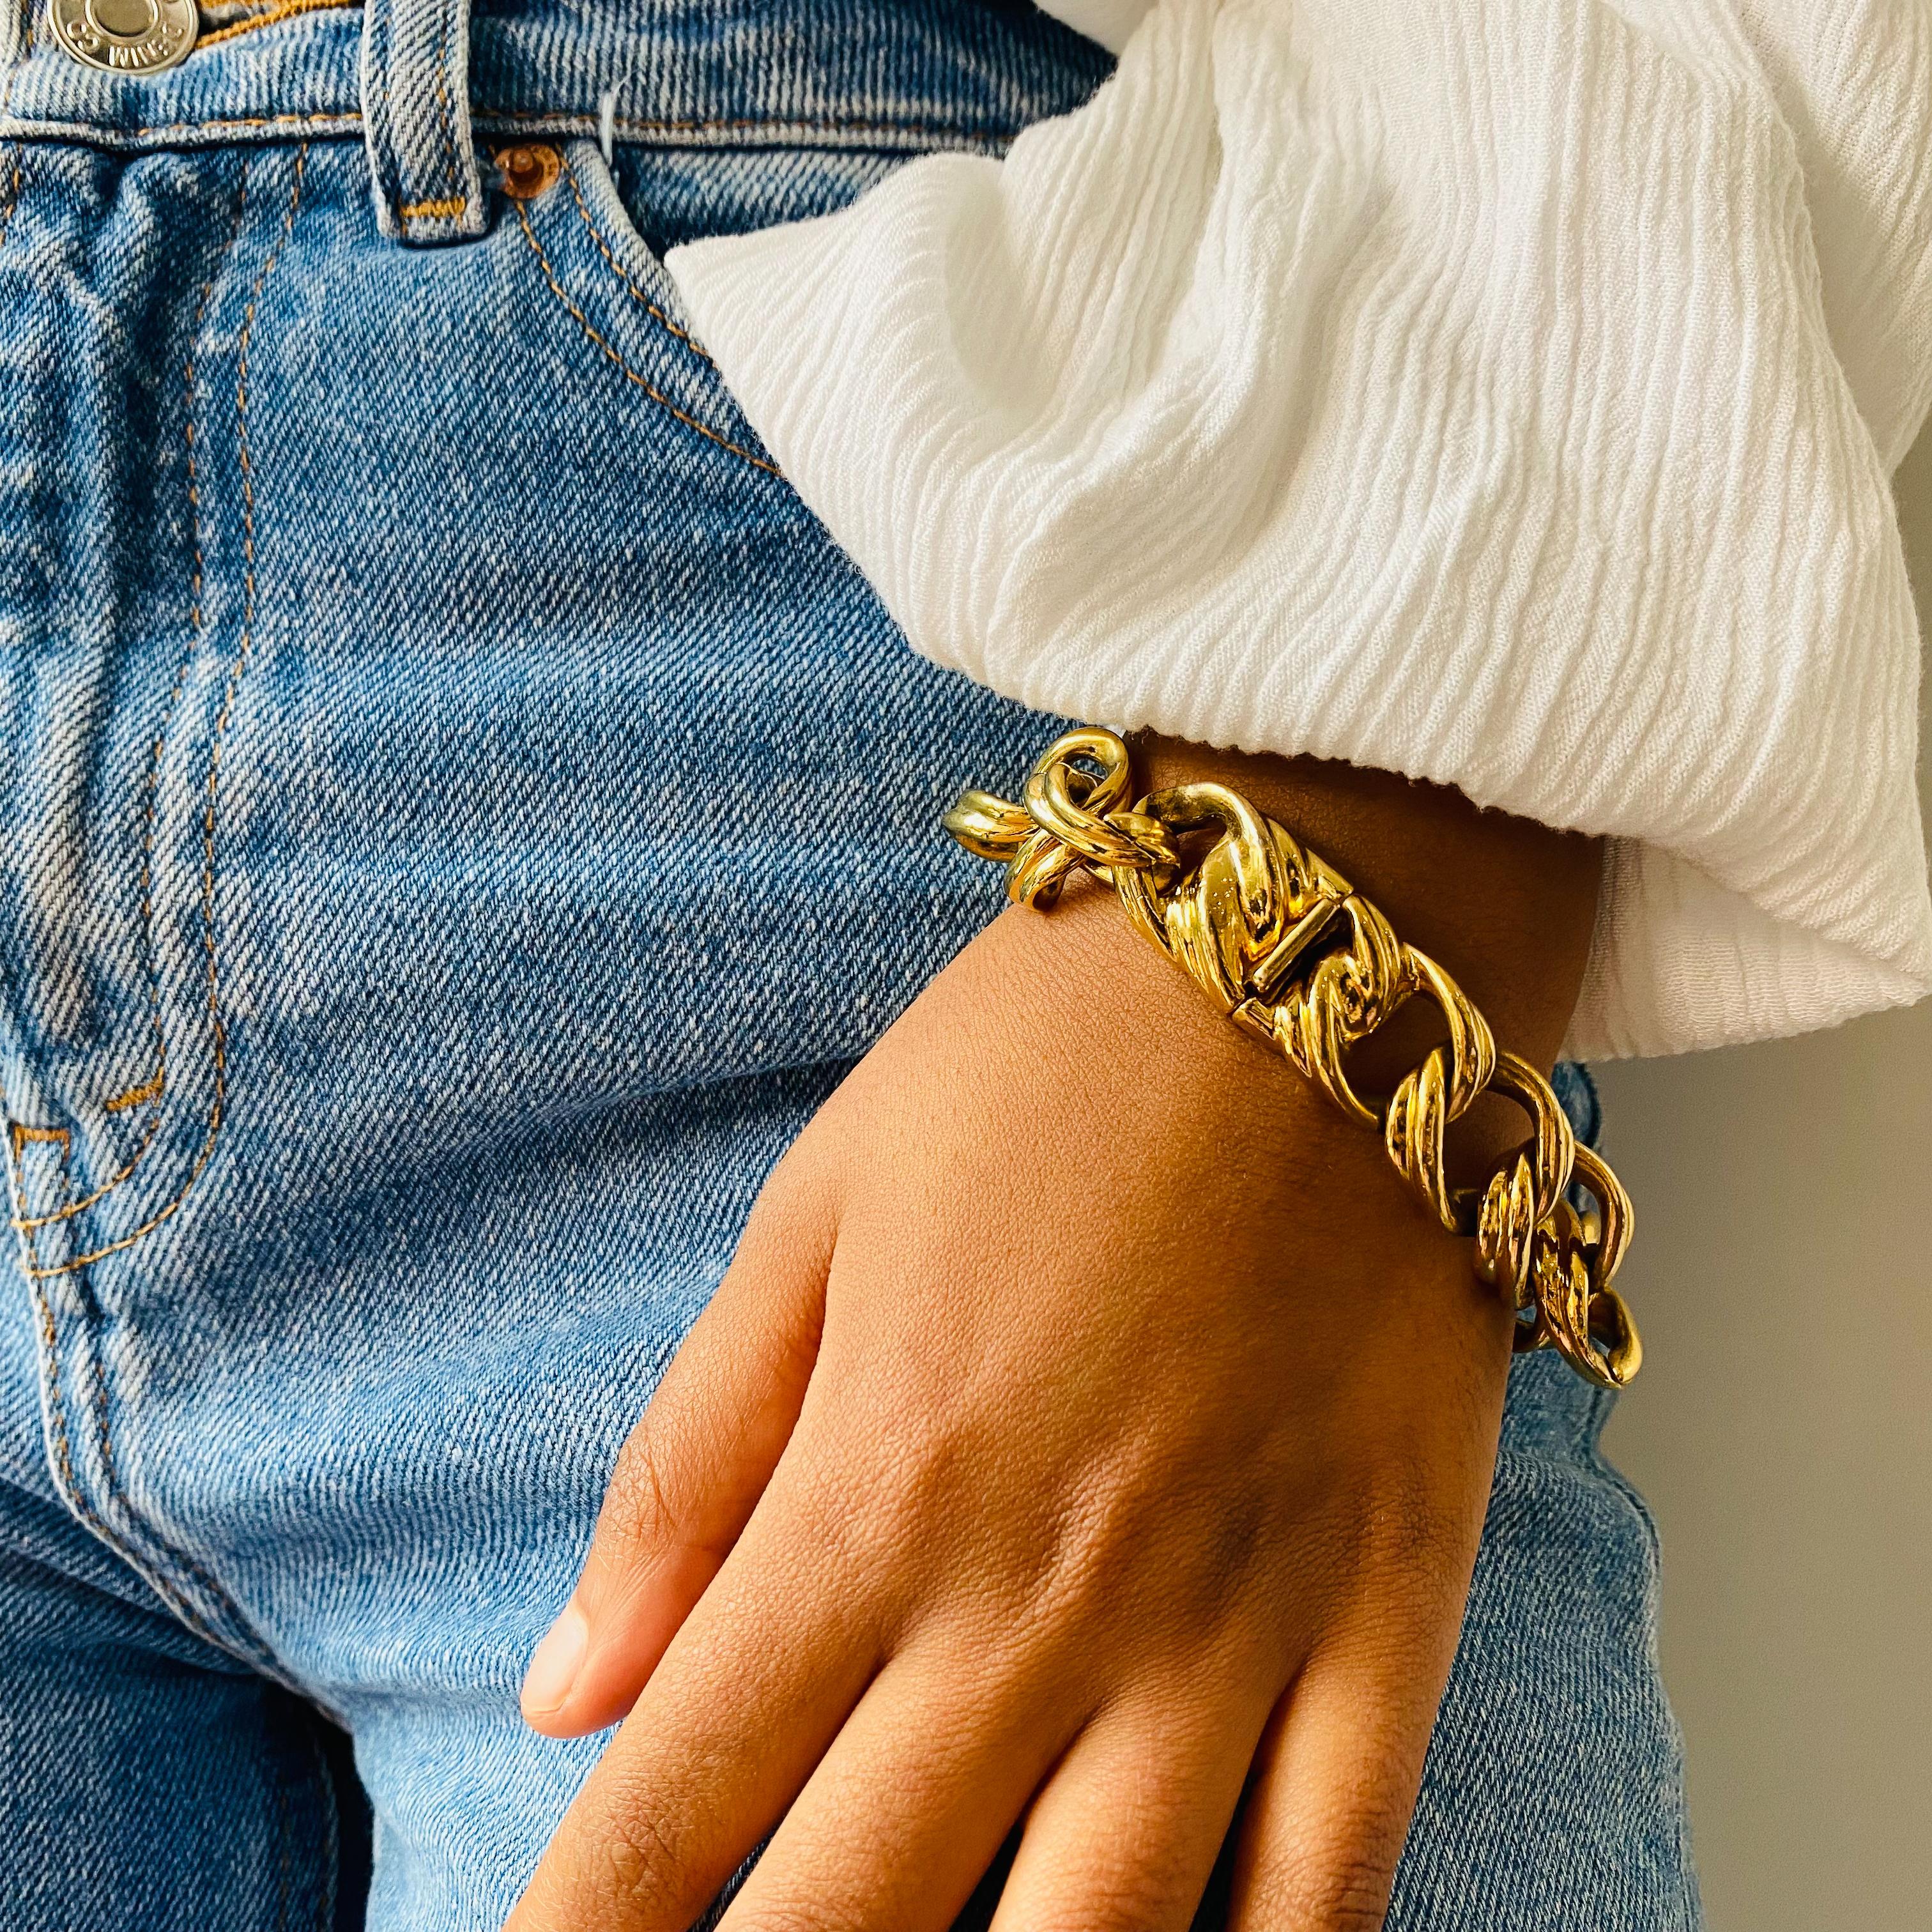 Christian Dior Vintage 1980s Bracelet

Super cool chunky gold plated articulated bracelet from Dior, still one of the world's most desirable labels. Made in Germany with classic 80s styling, this bracelet has timeless contemporary appeal. Stack for